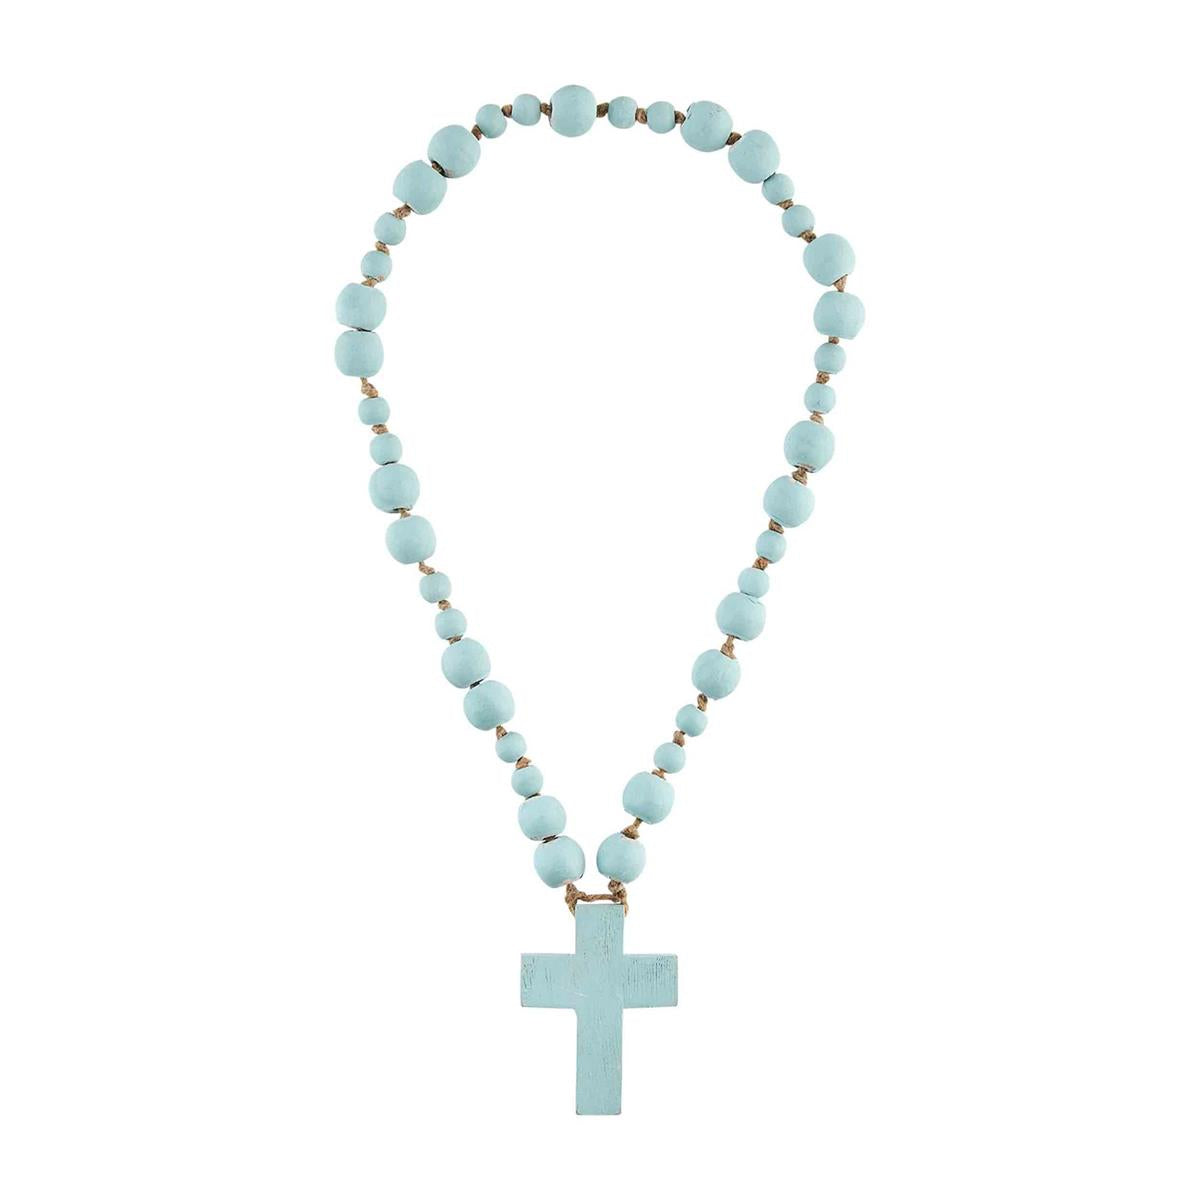 blue decorative cross beads on a white background